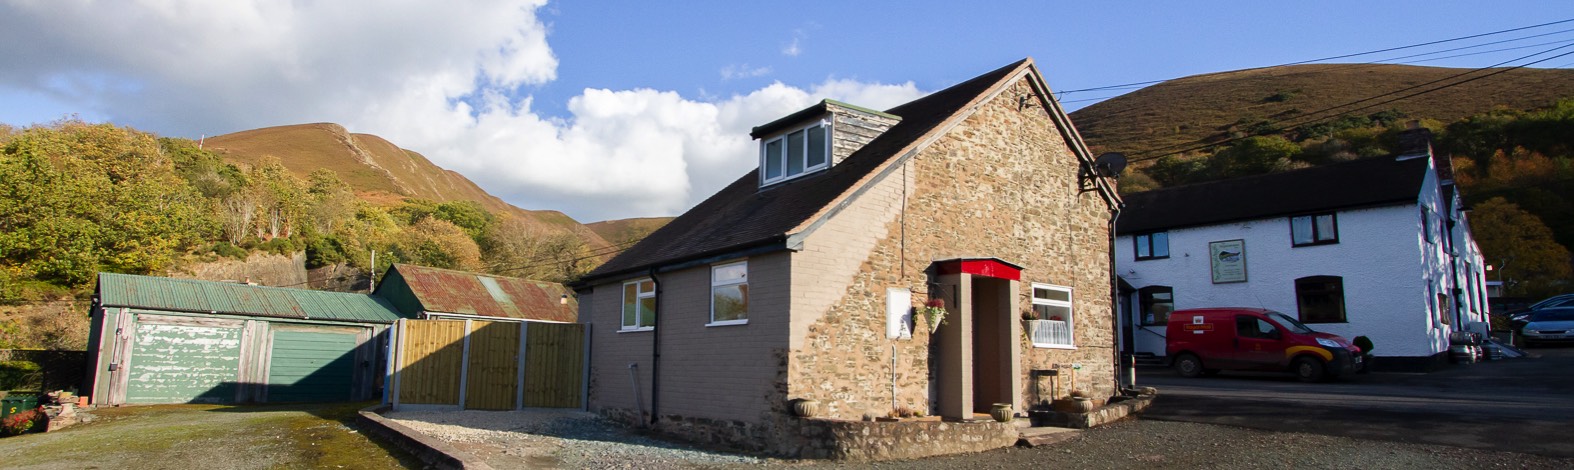 The Old Chapel, Self Catering, Stiperstones Shropshire